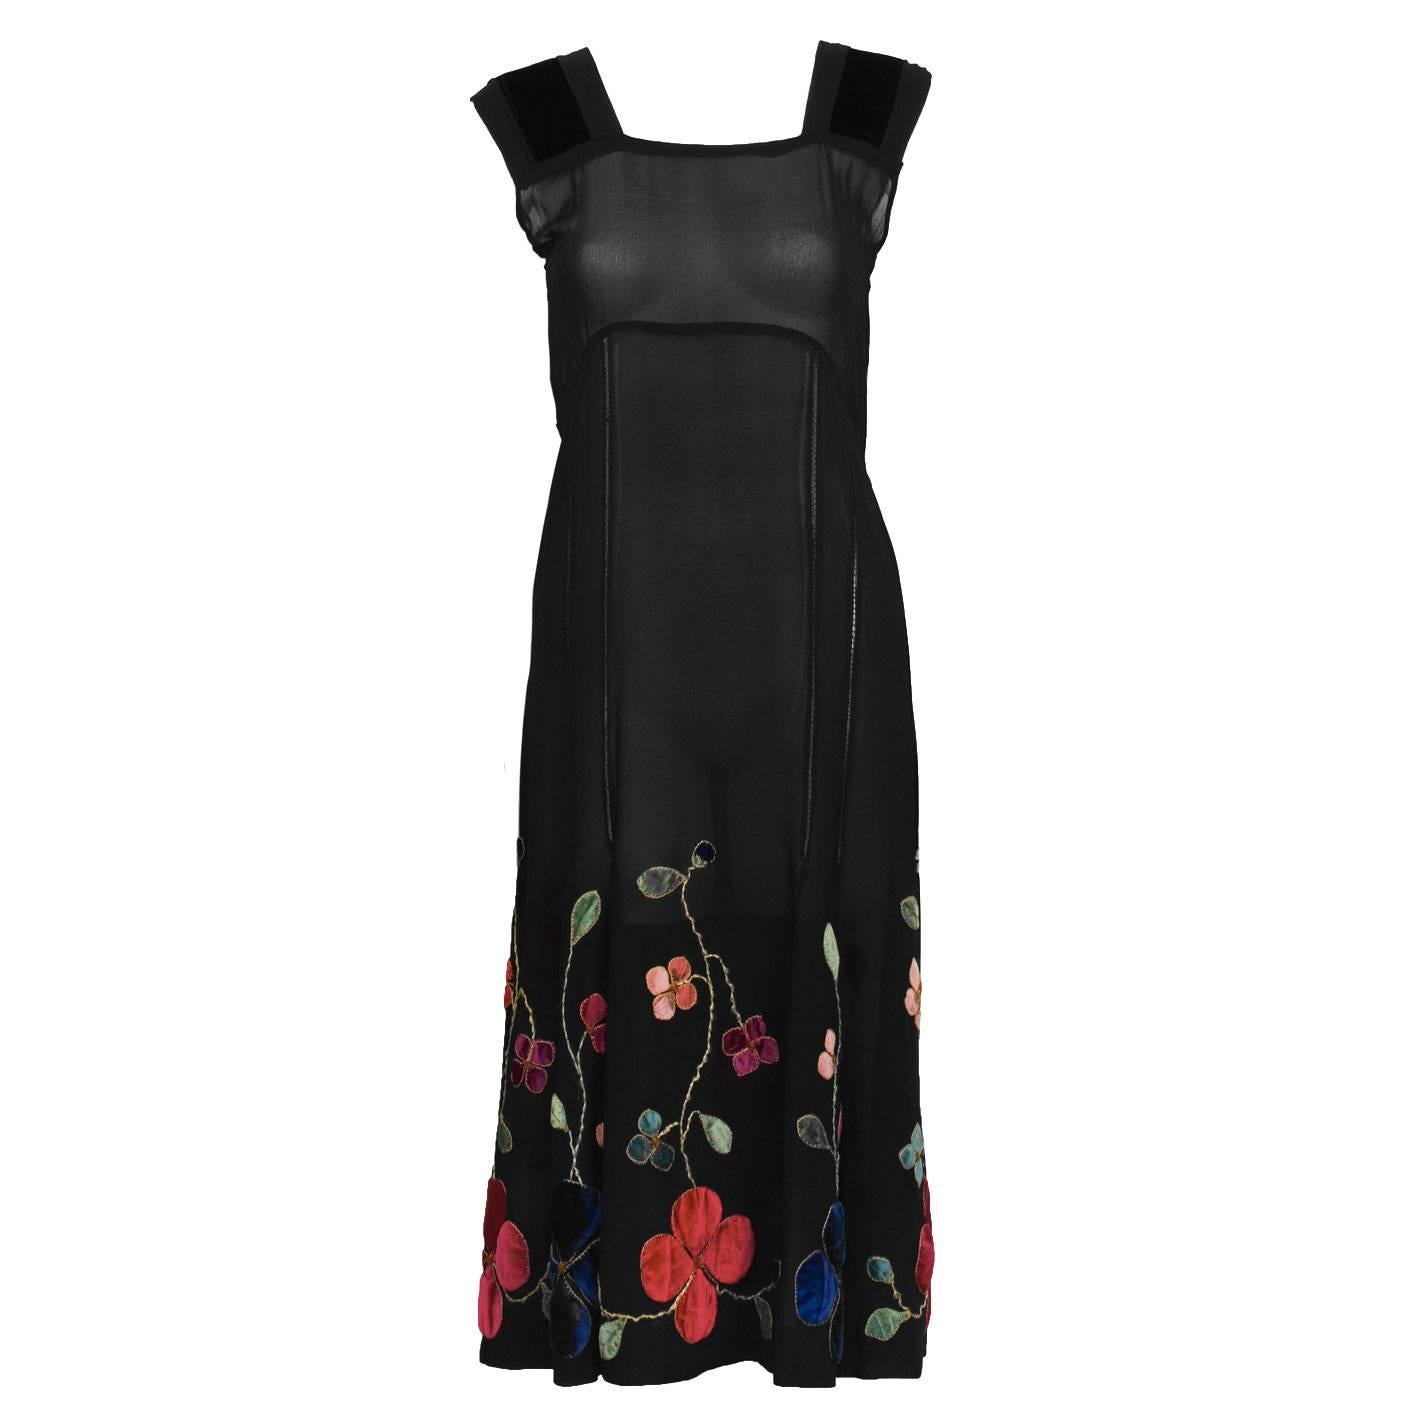 1930's Black Velvet & Chiffon Tea Dress with Floral Embroidery 